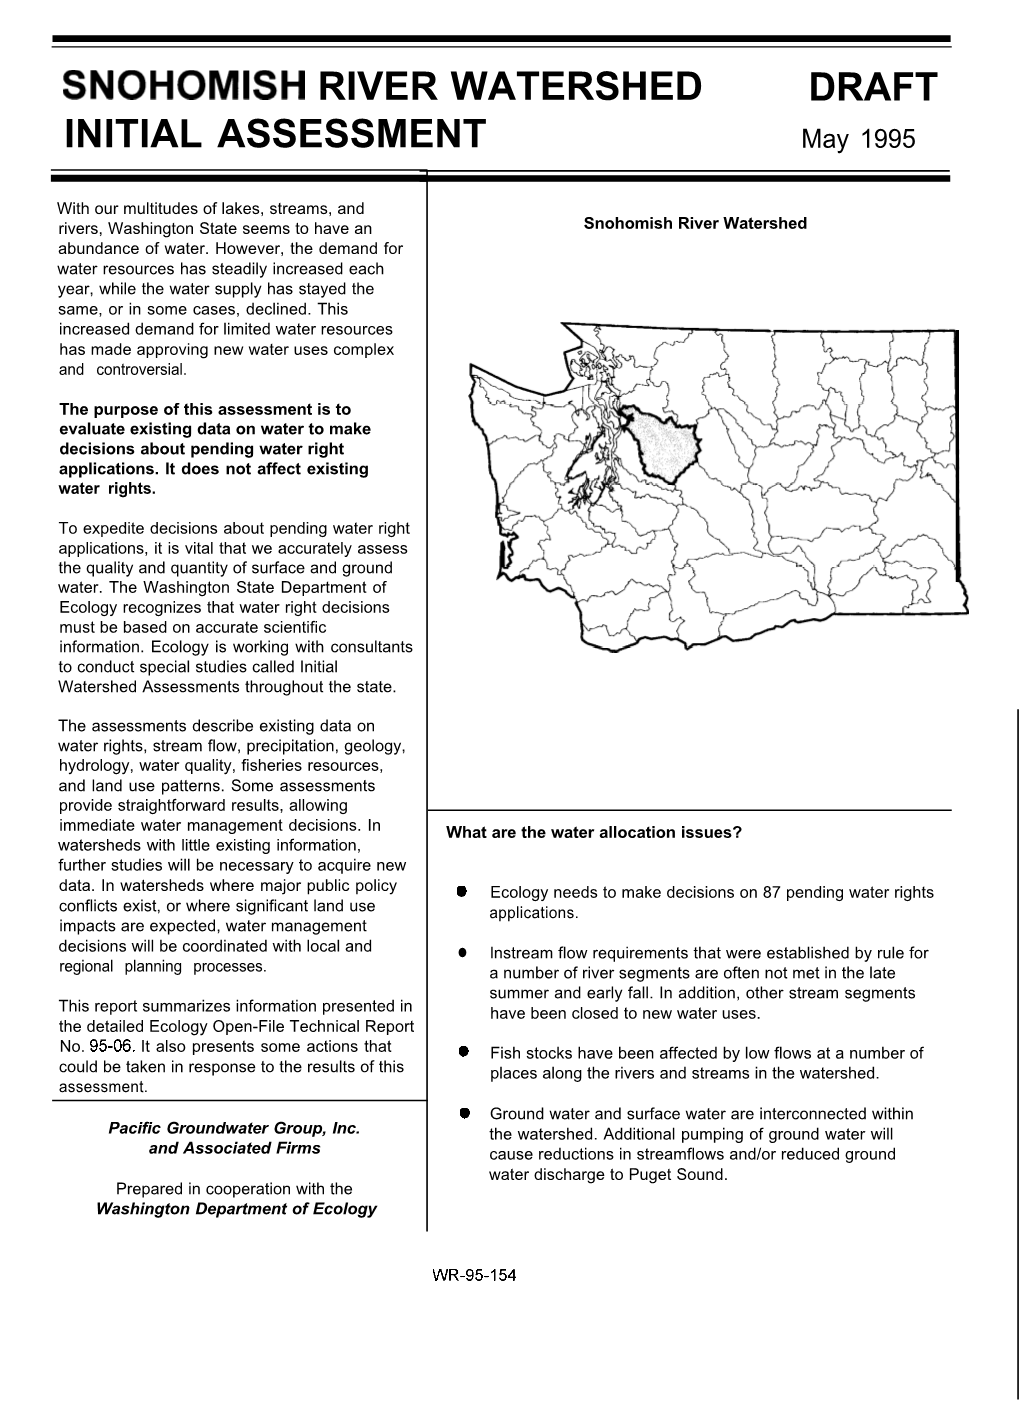 Snohomish River Watershed Assessment Summary